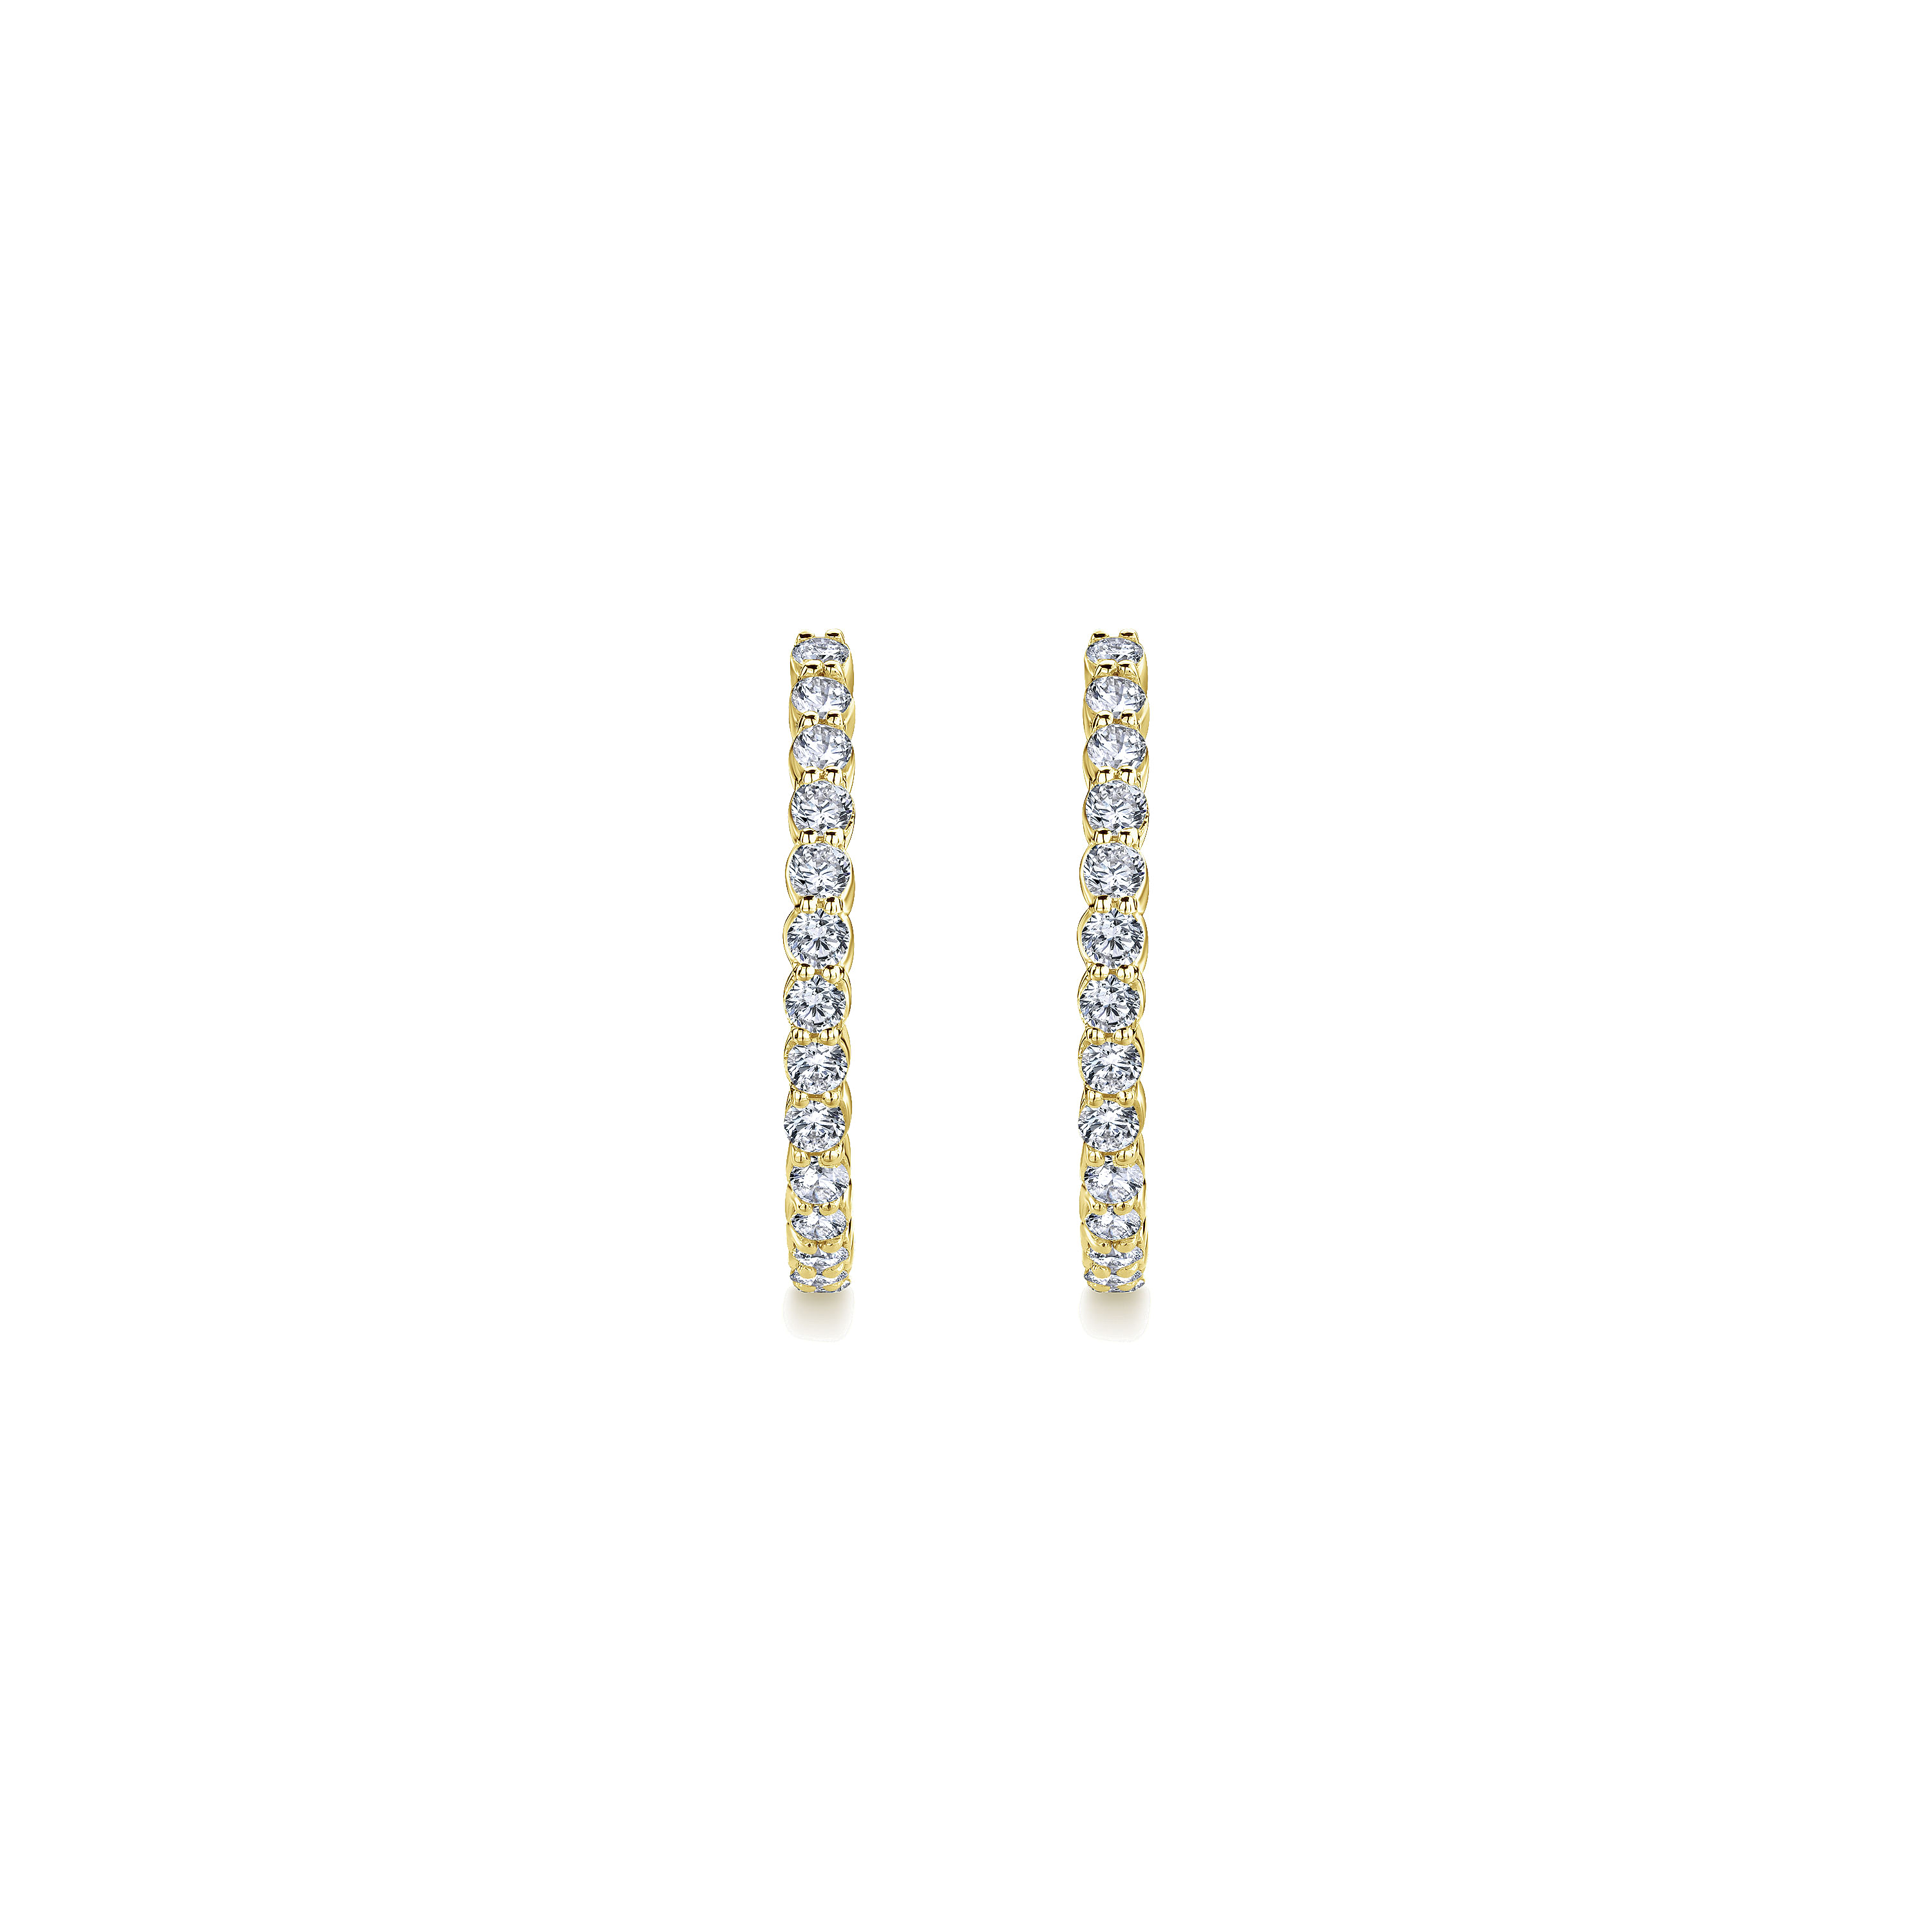 14K Yellow Gold 30mm Round Inside Out Diamond Hoop Earrings